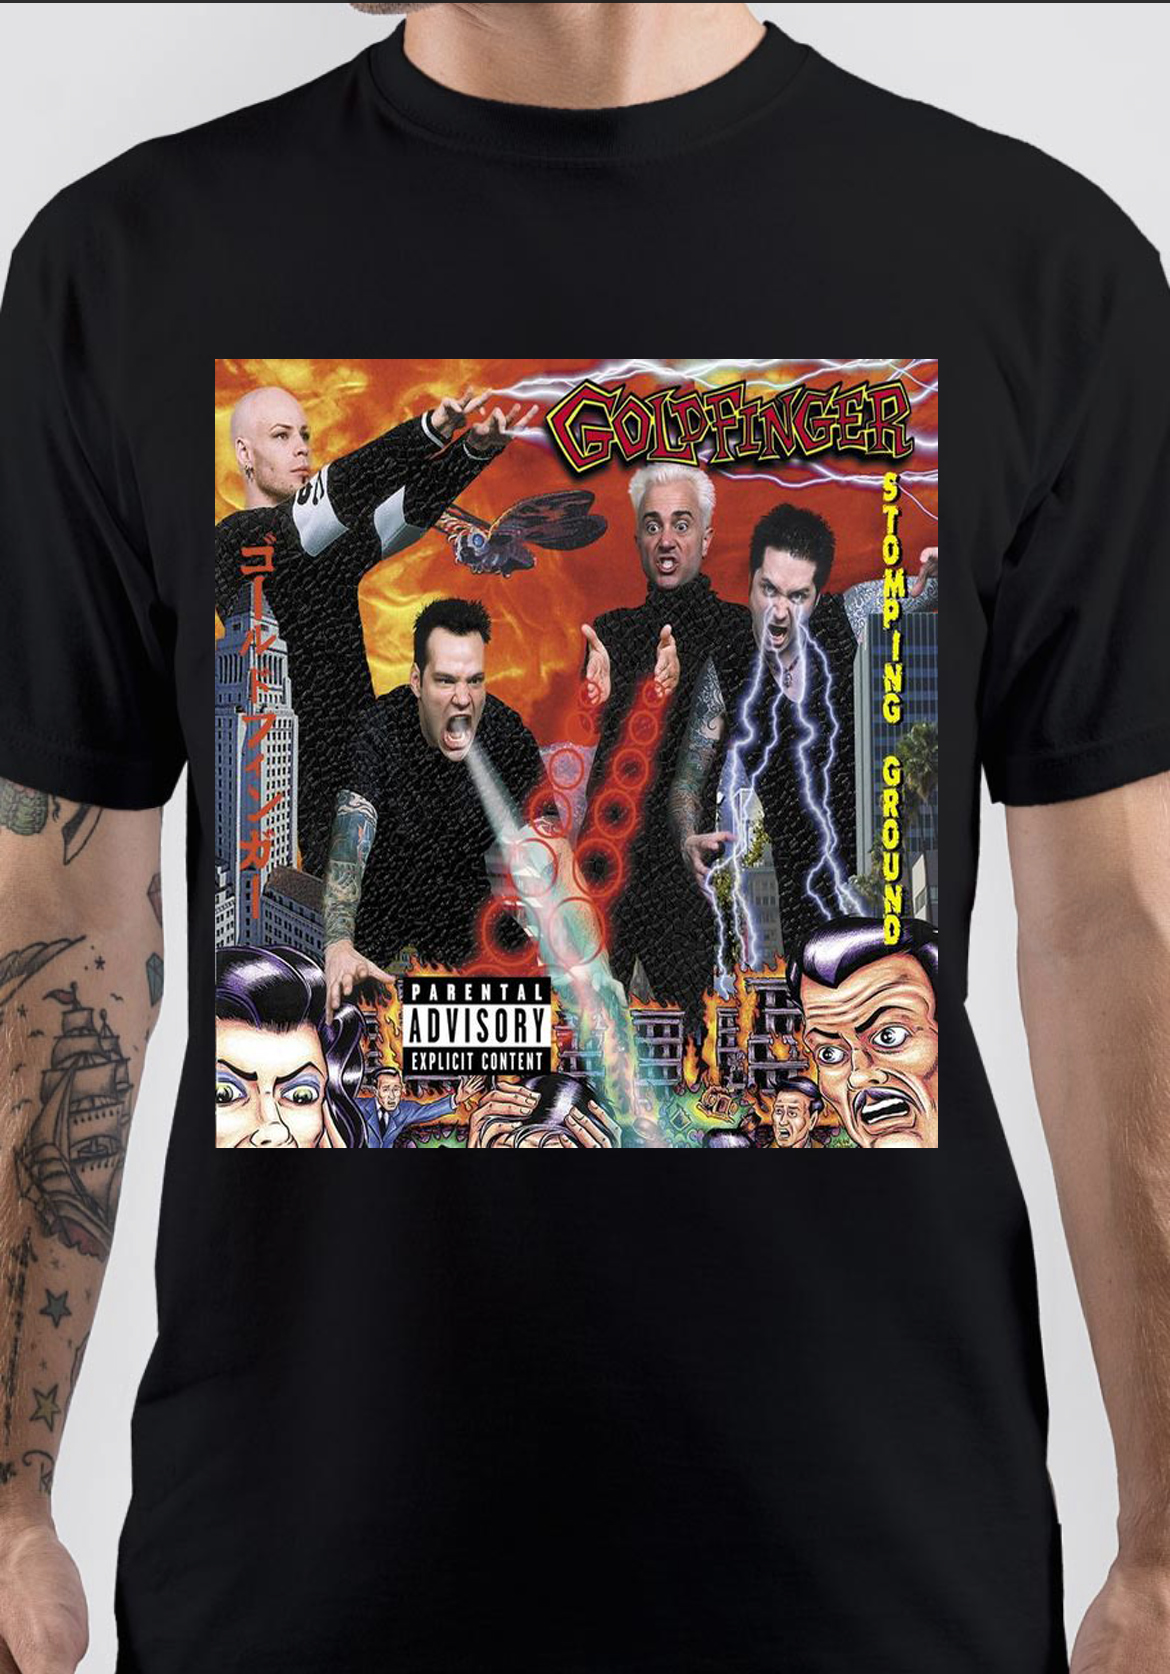 Goldfinger Band T-Shirt And Merchandise